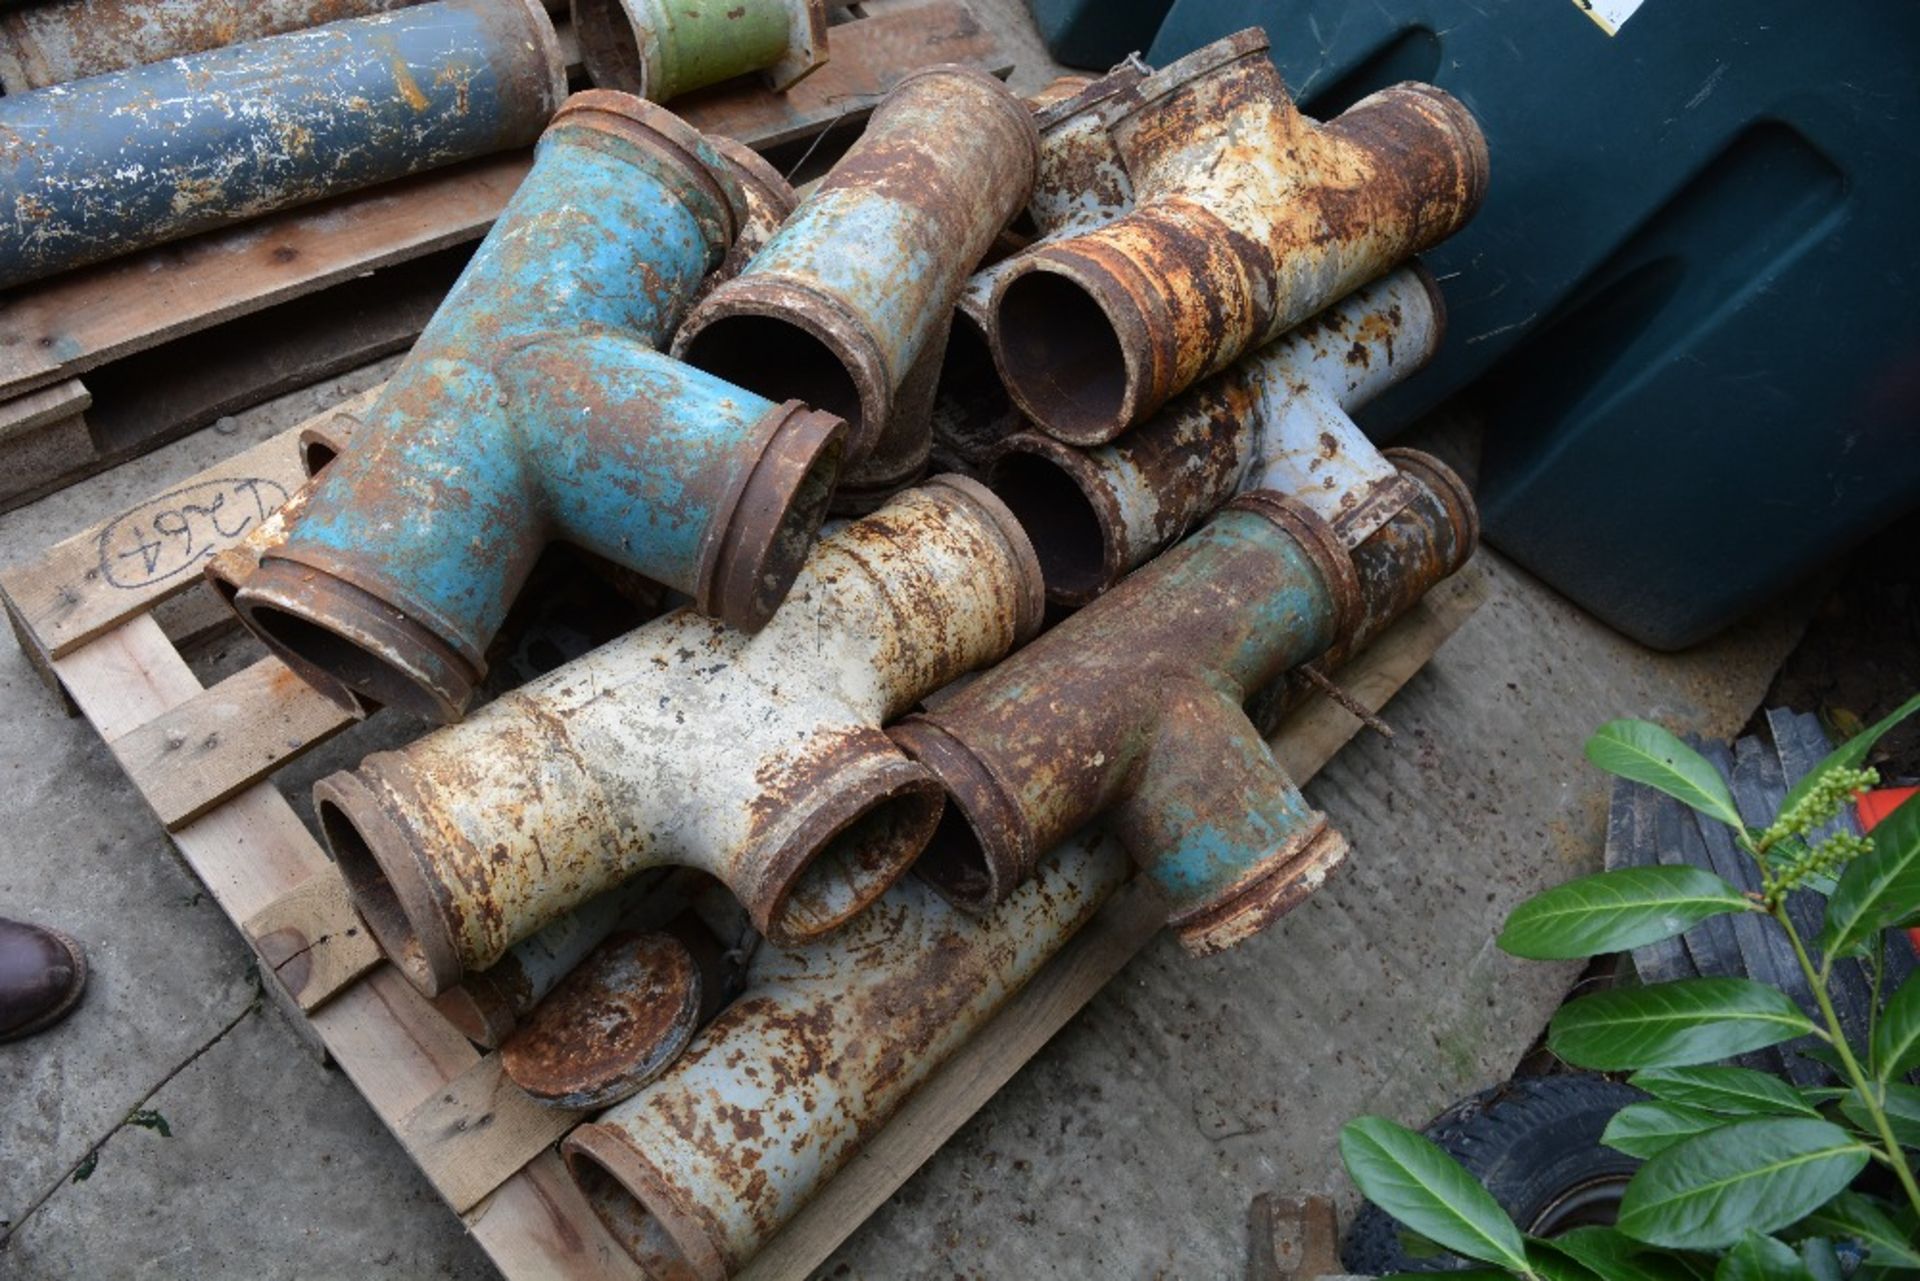 ASSORTED 5'' CONCRETE PIPE T-JOINTS (1 PALLET), ID: PL-15656, RUISLIP PLANT HIRE LTD. *UNRESERVED* - Image 2 of 2